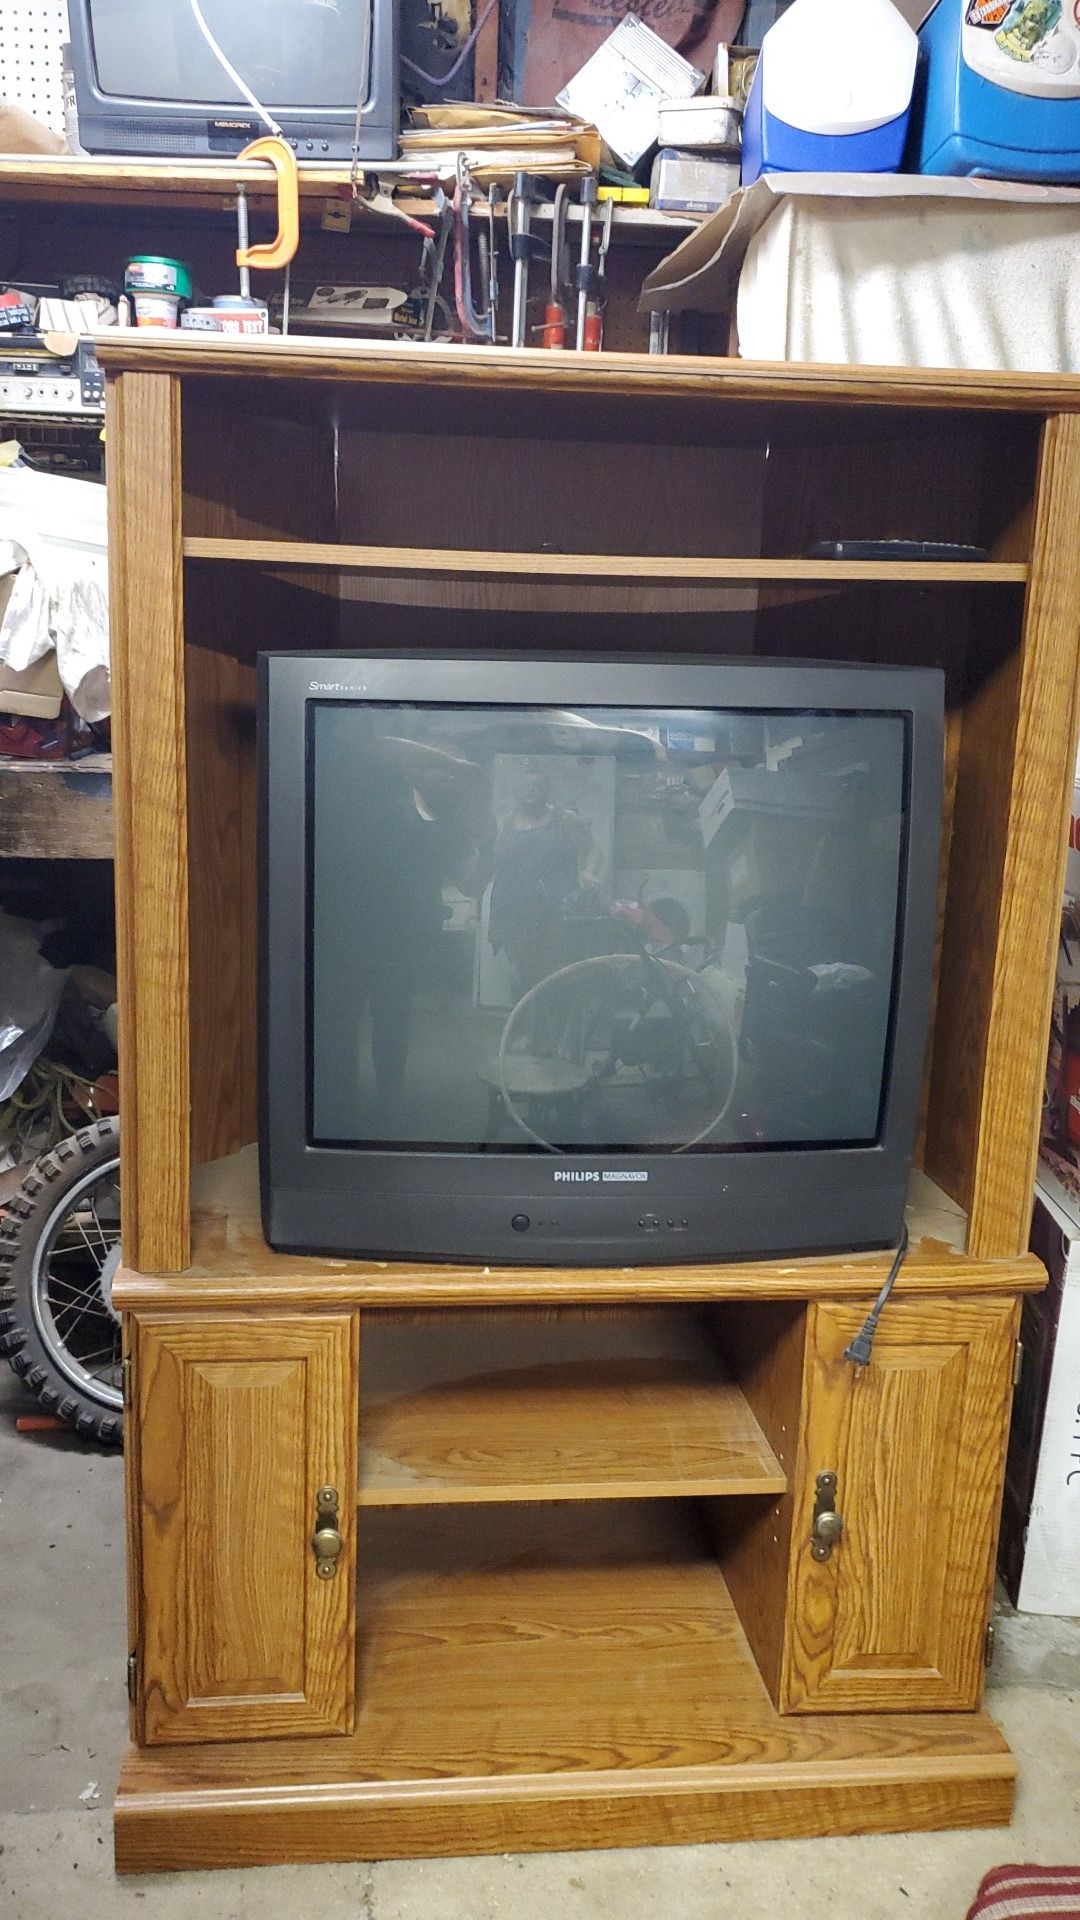 Entertainment center with TV old brand TV but works SERIOUS BUYERS ONLY